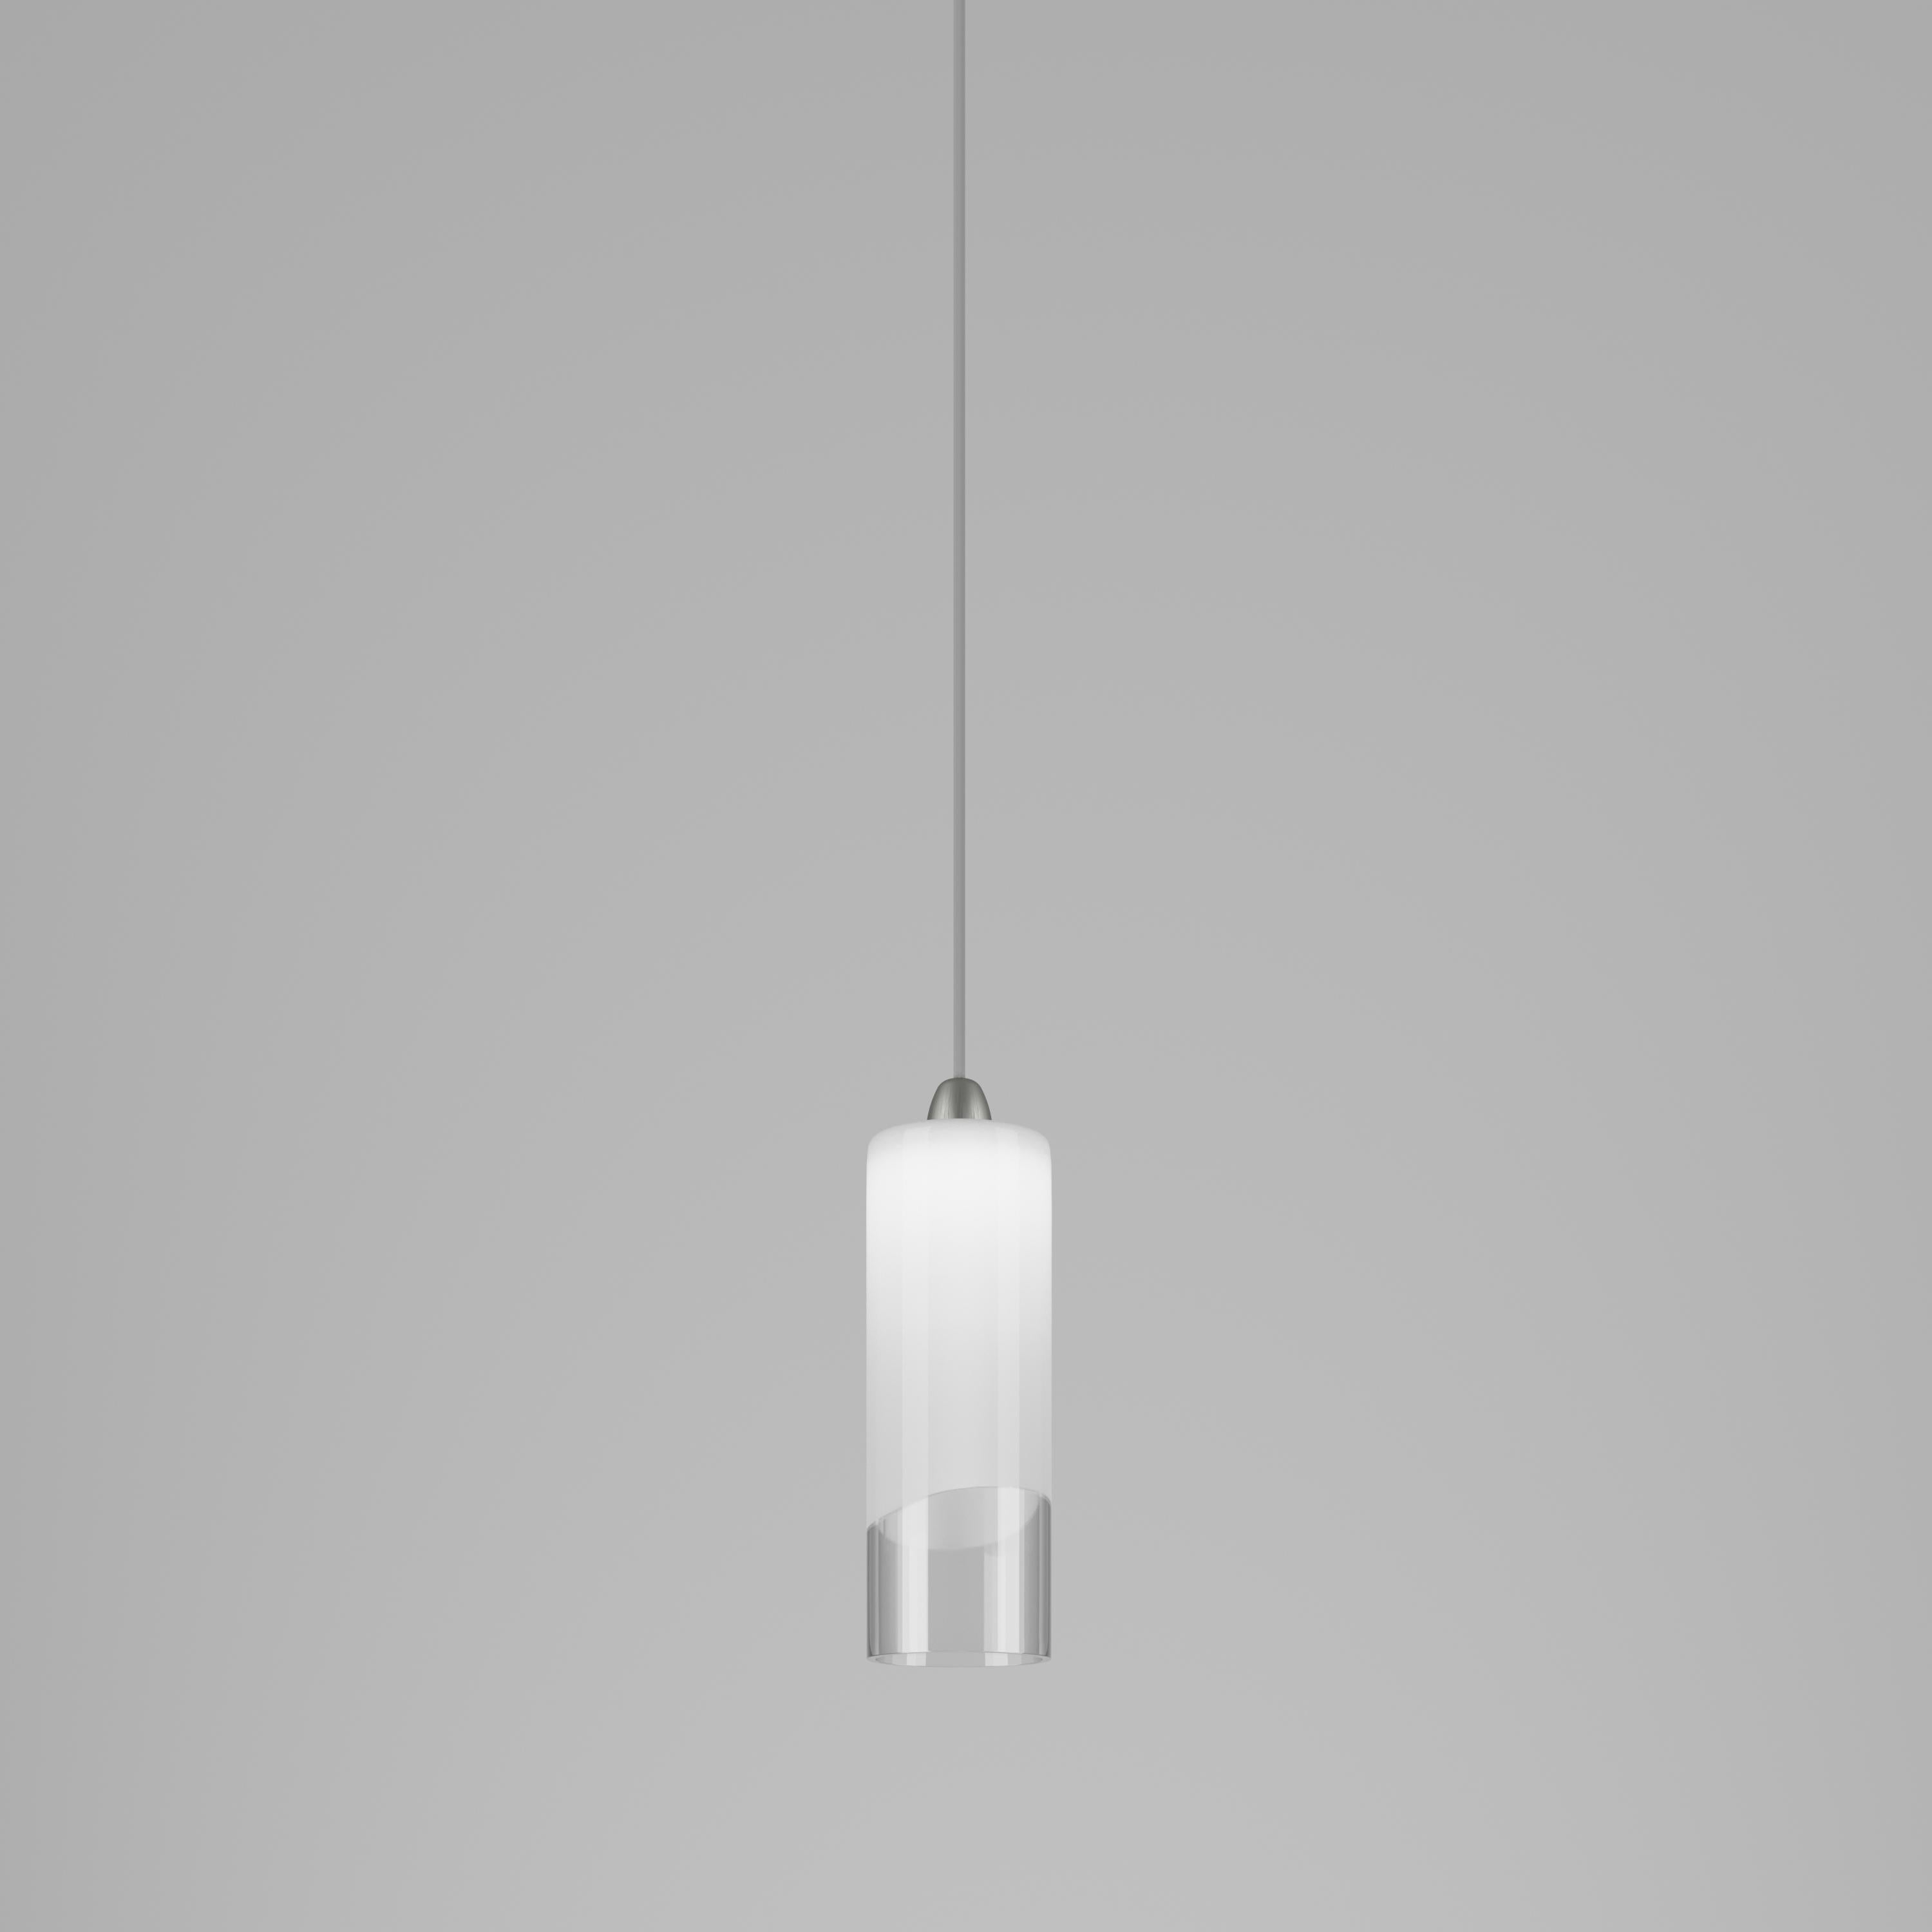 Modern Vistosi Lio Pendant Light in Crystal And White For Sale